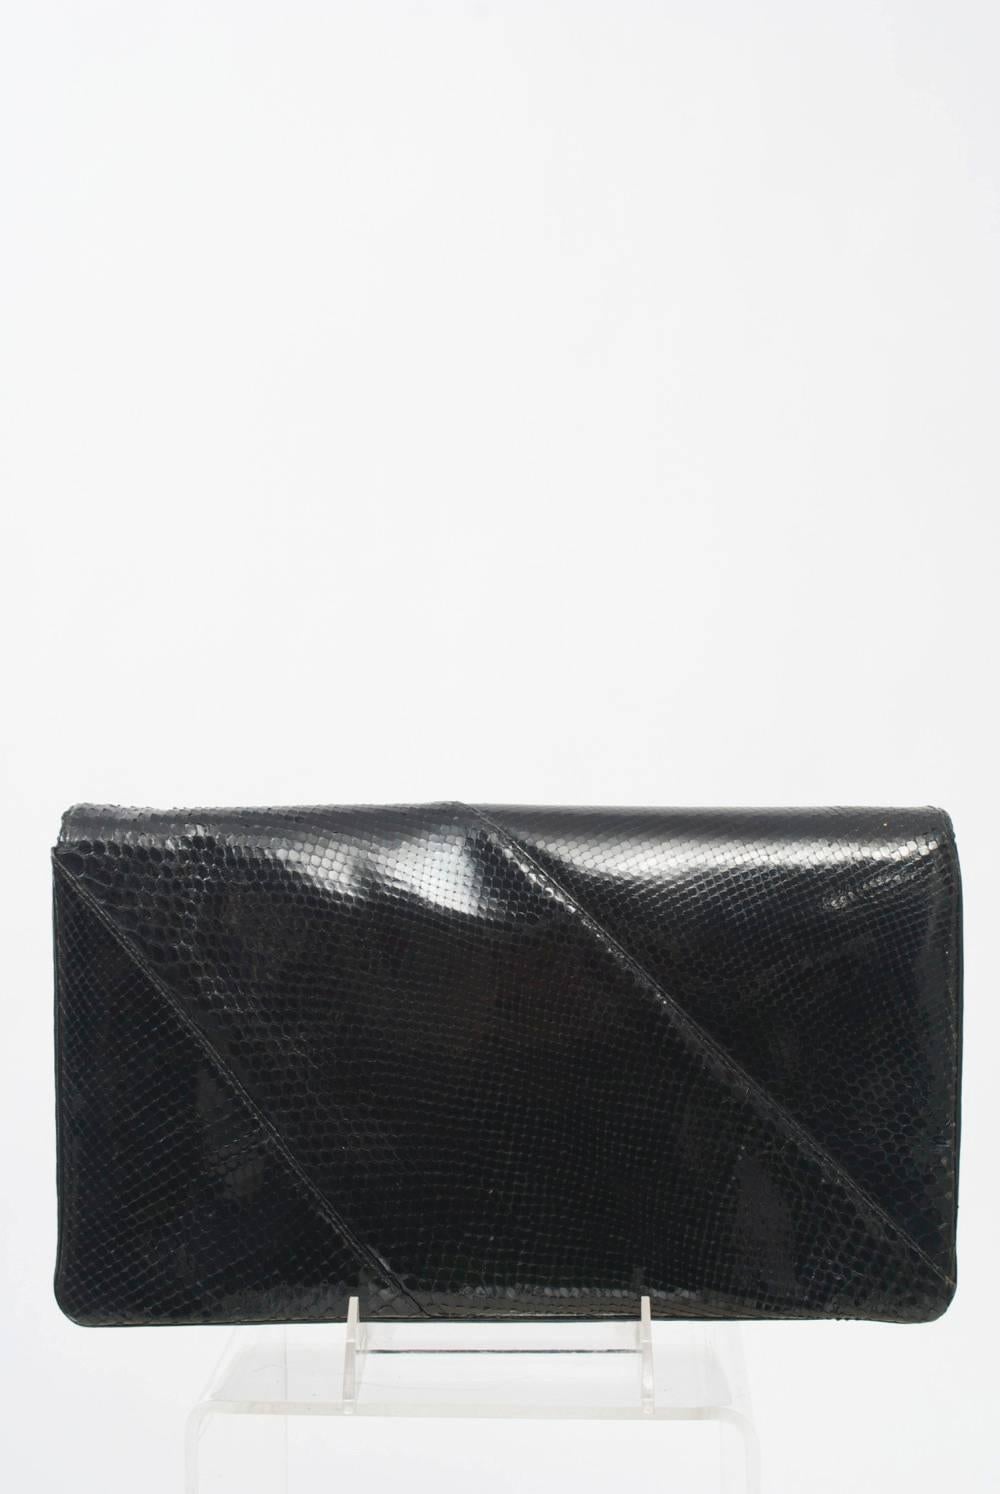 Nice size black snake clutch with silver metal trim featuring diagonally pieced skins and multiple interior compartments.